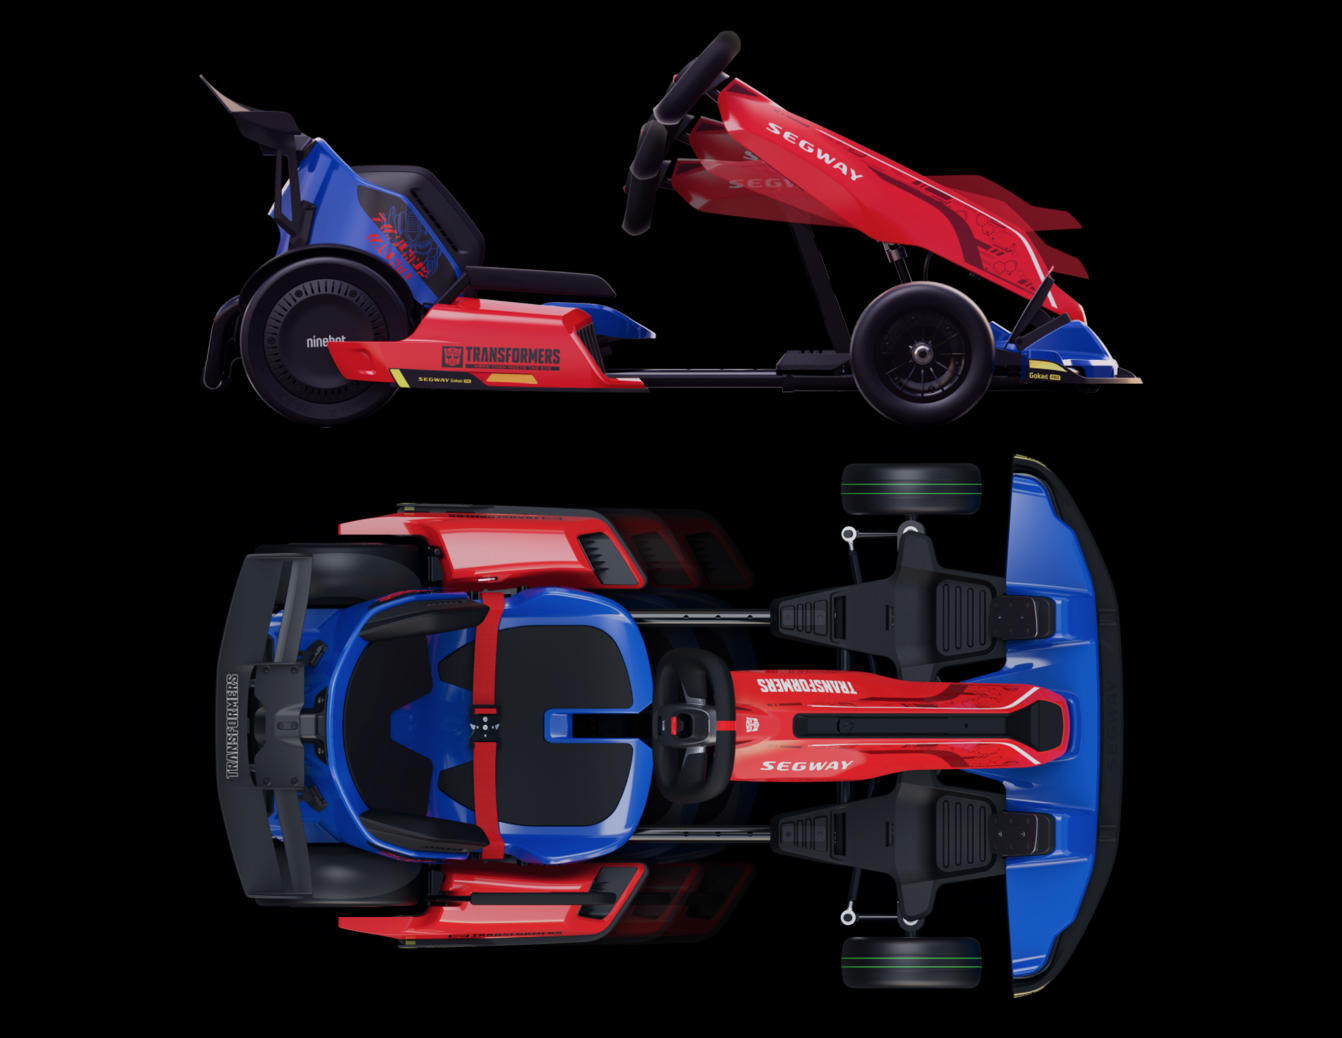 Bird's eye view and side view of Segway Optimus Prime electric gokart